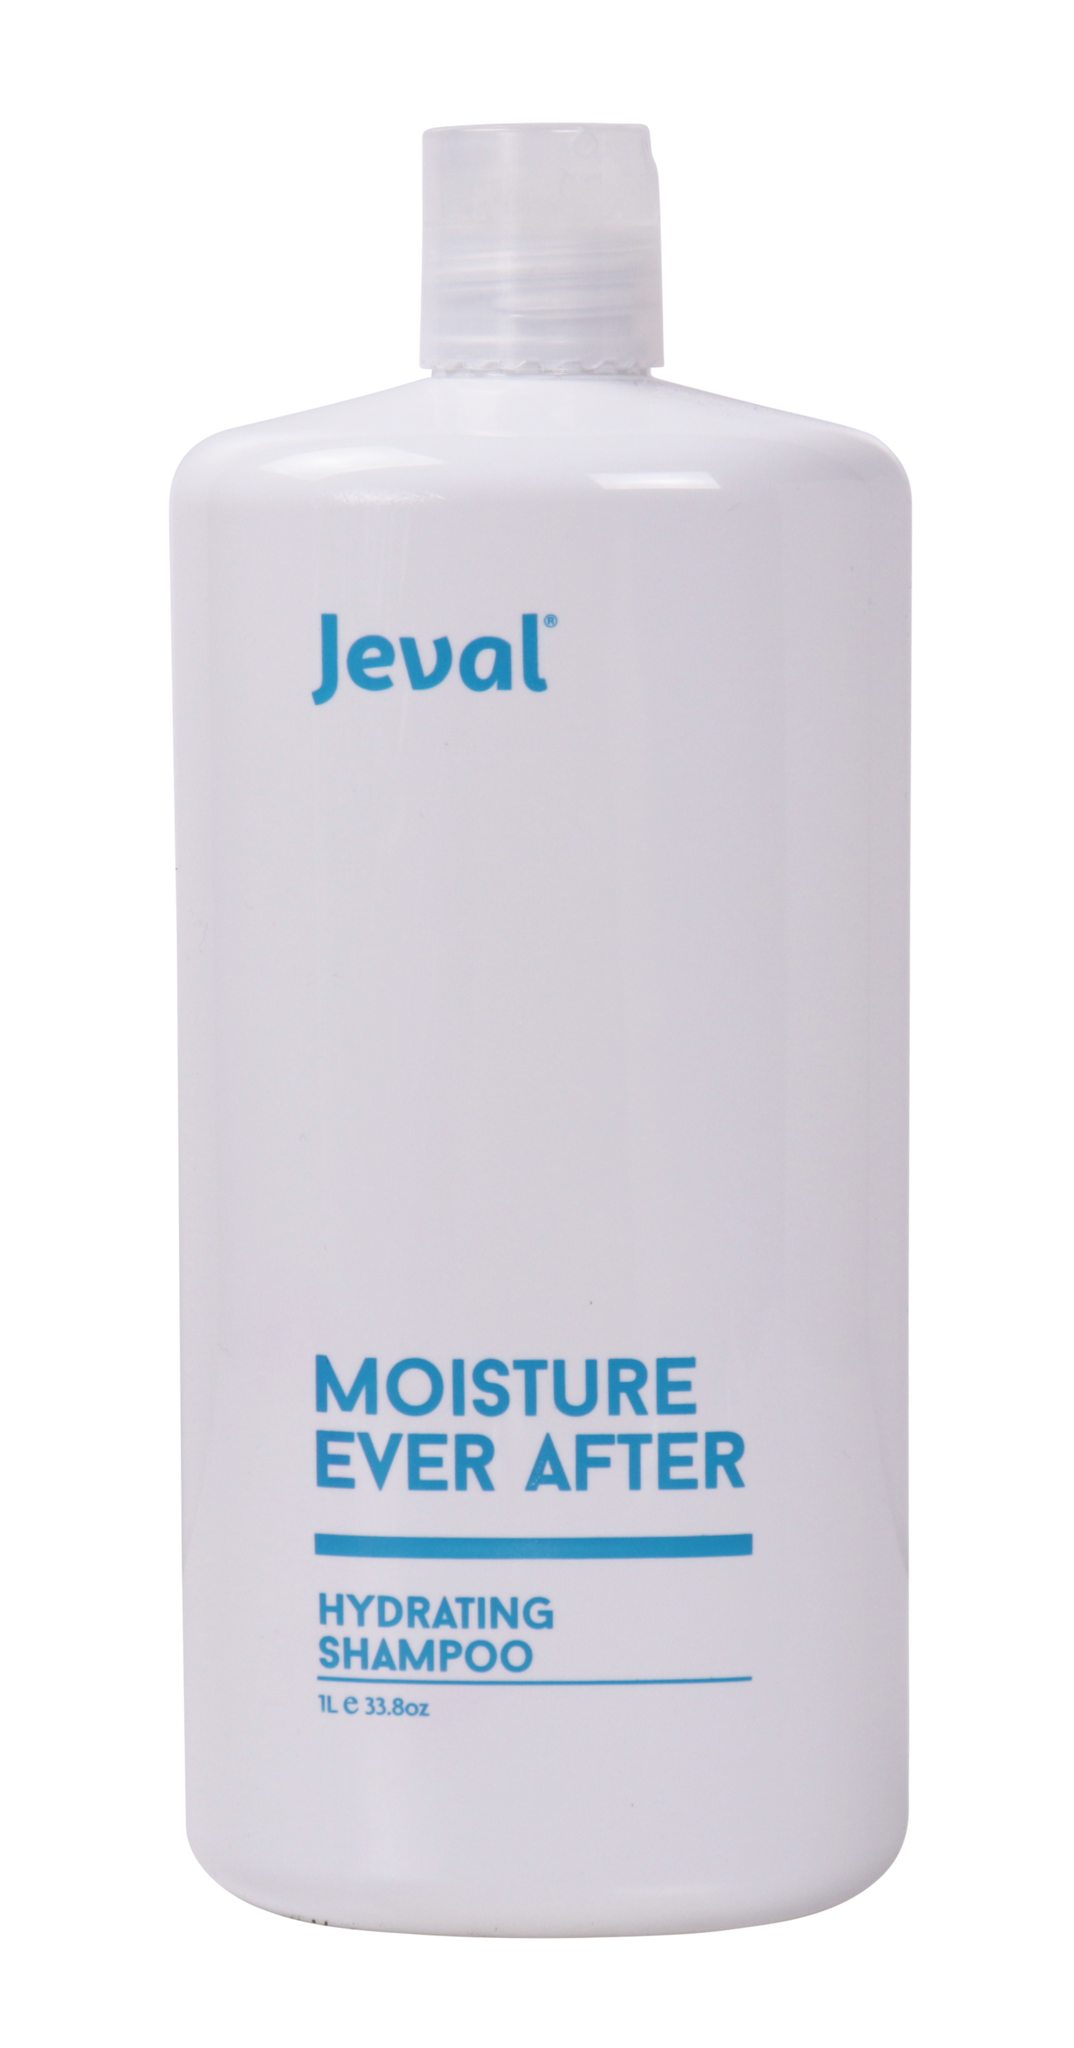 Jeval Moisture Ever After Hydrating Shampoo 1 Litre - Beautopia Hair & Beauty